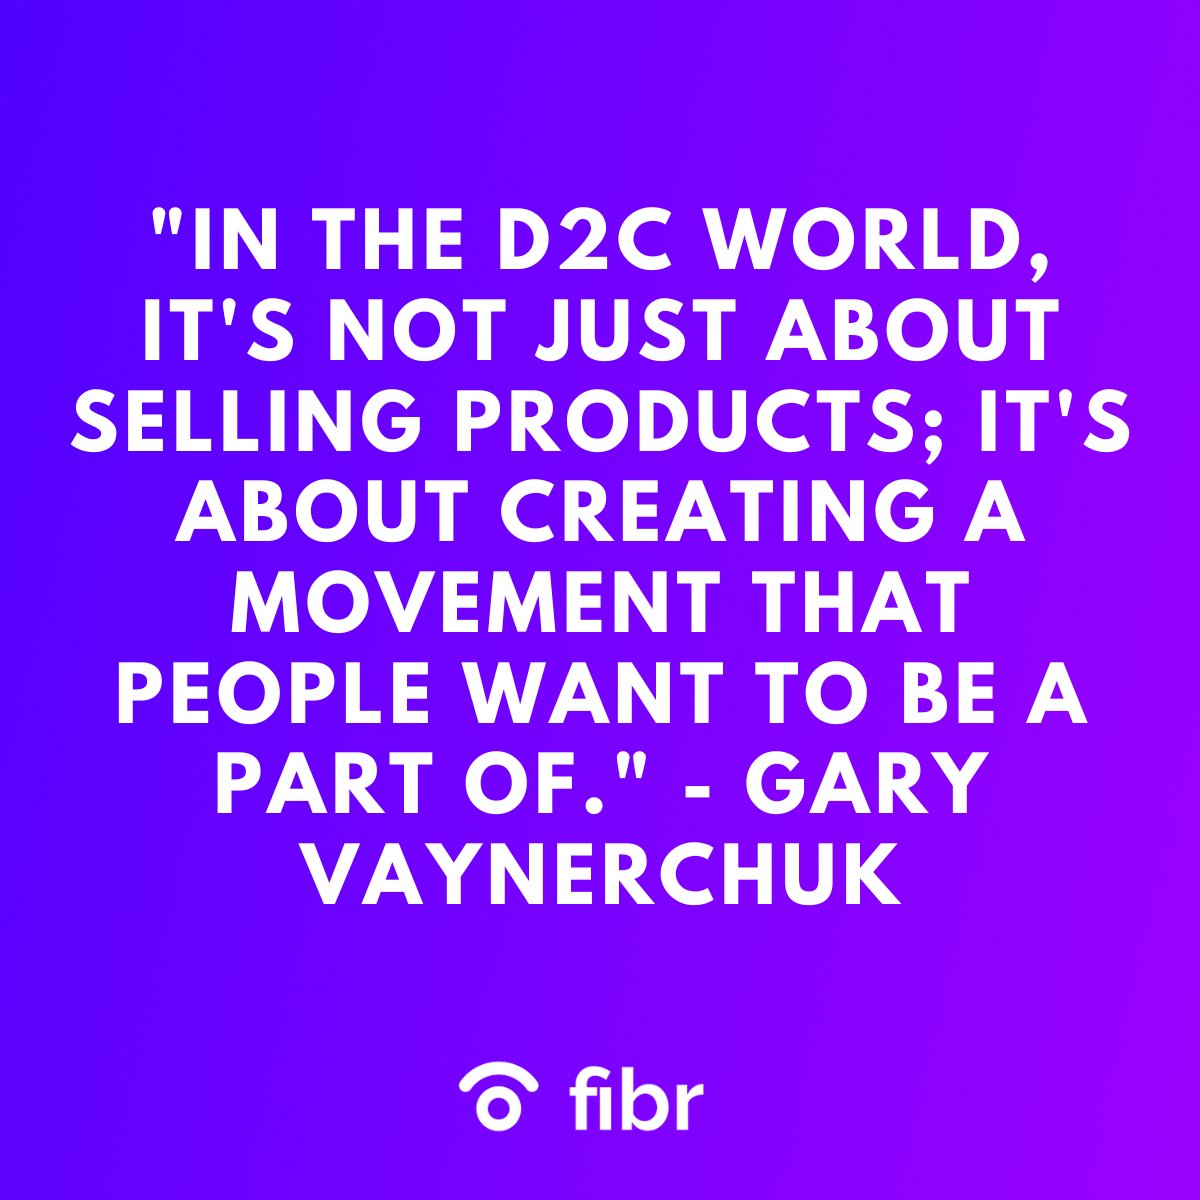 As @garyvee  says, the D2C revolution is about more than just selling. It's about forging meaningful connections with customers and sparking a movement.

#d2cbrands #ecommerce #onlineshopping #ConnectedCommerce #SocialCommerce #d2cRevolution #d2cMarketing